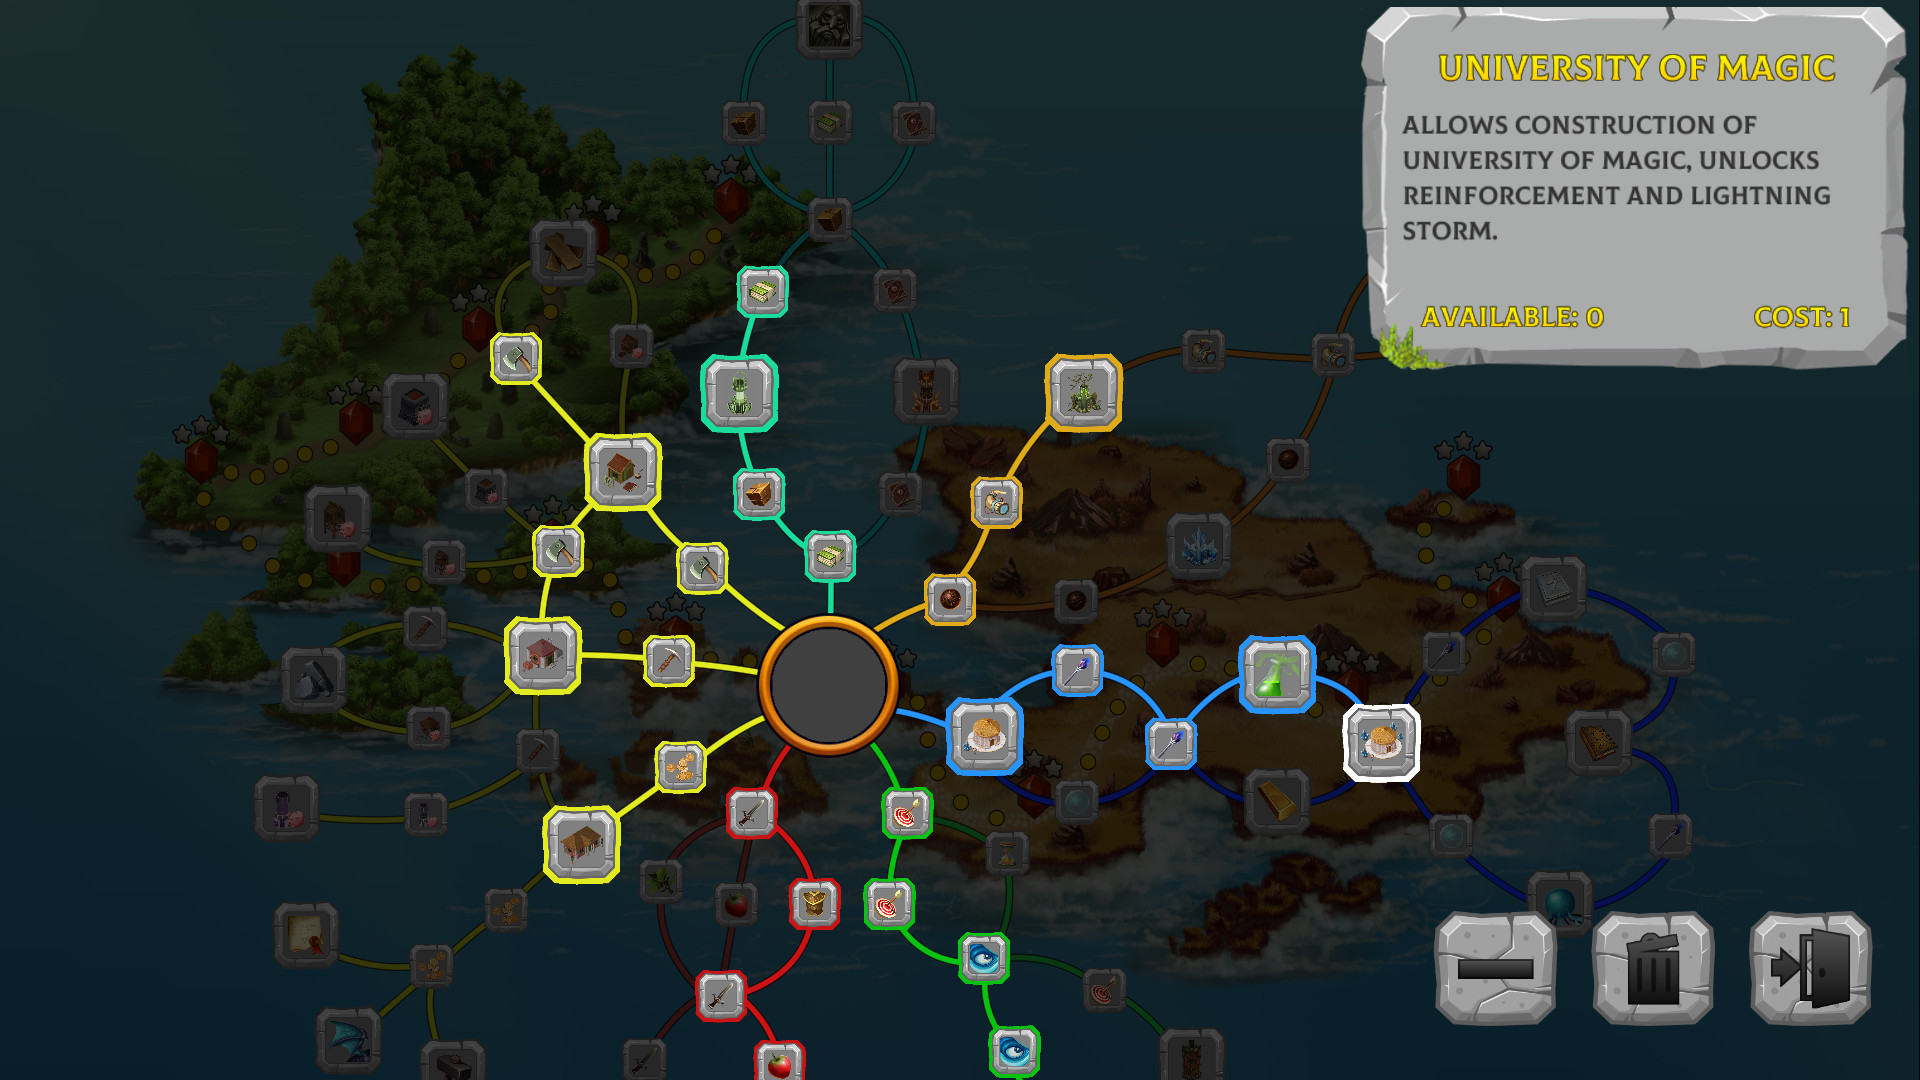 Ancient Islands Free Download